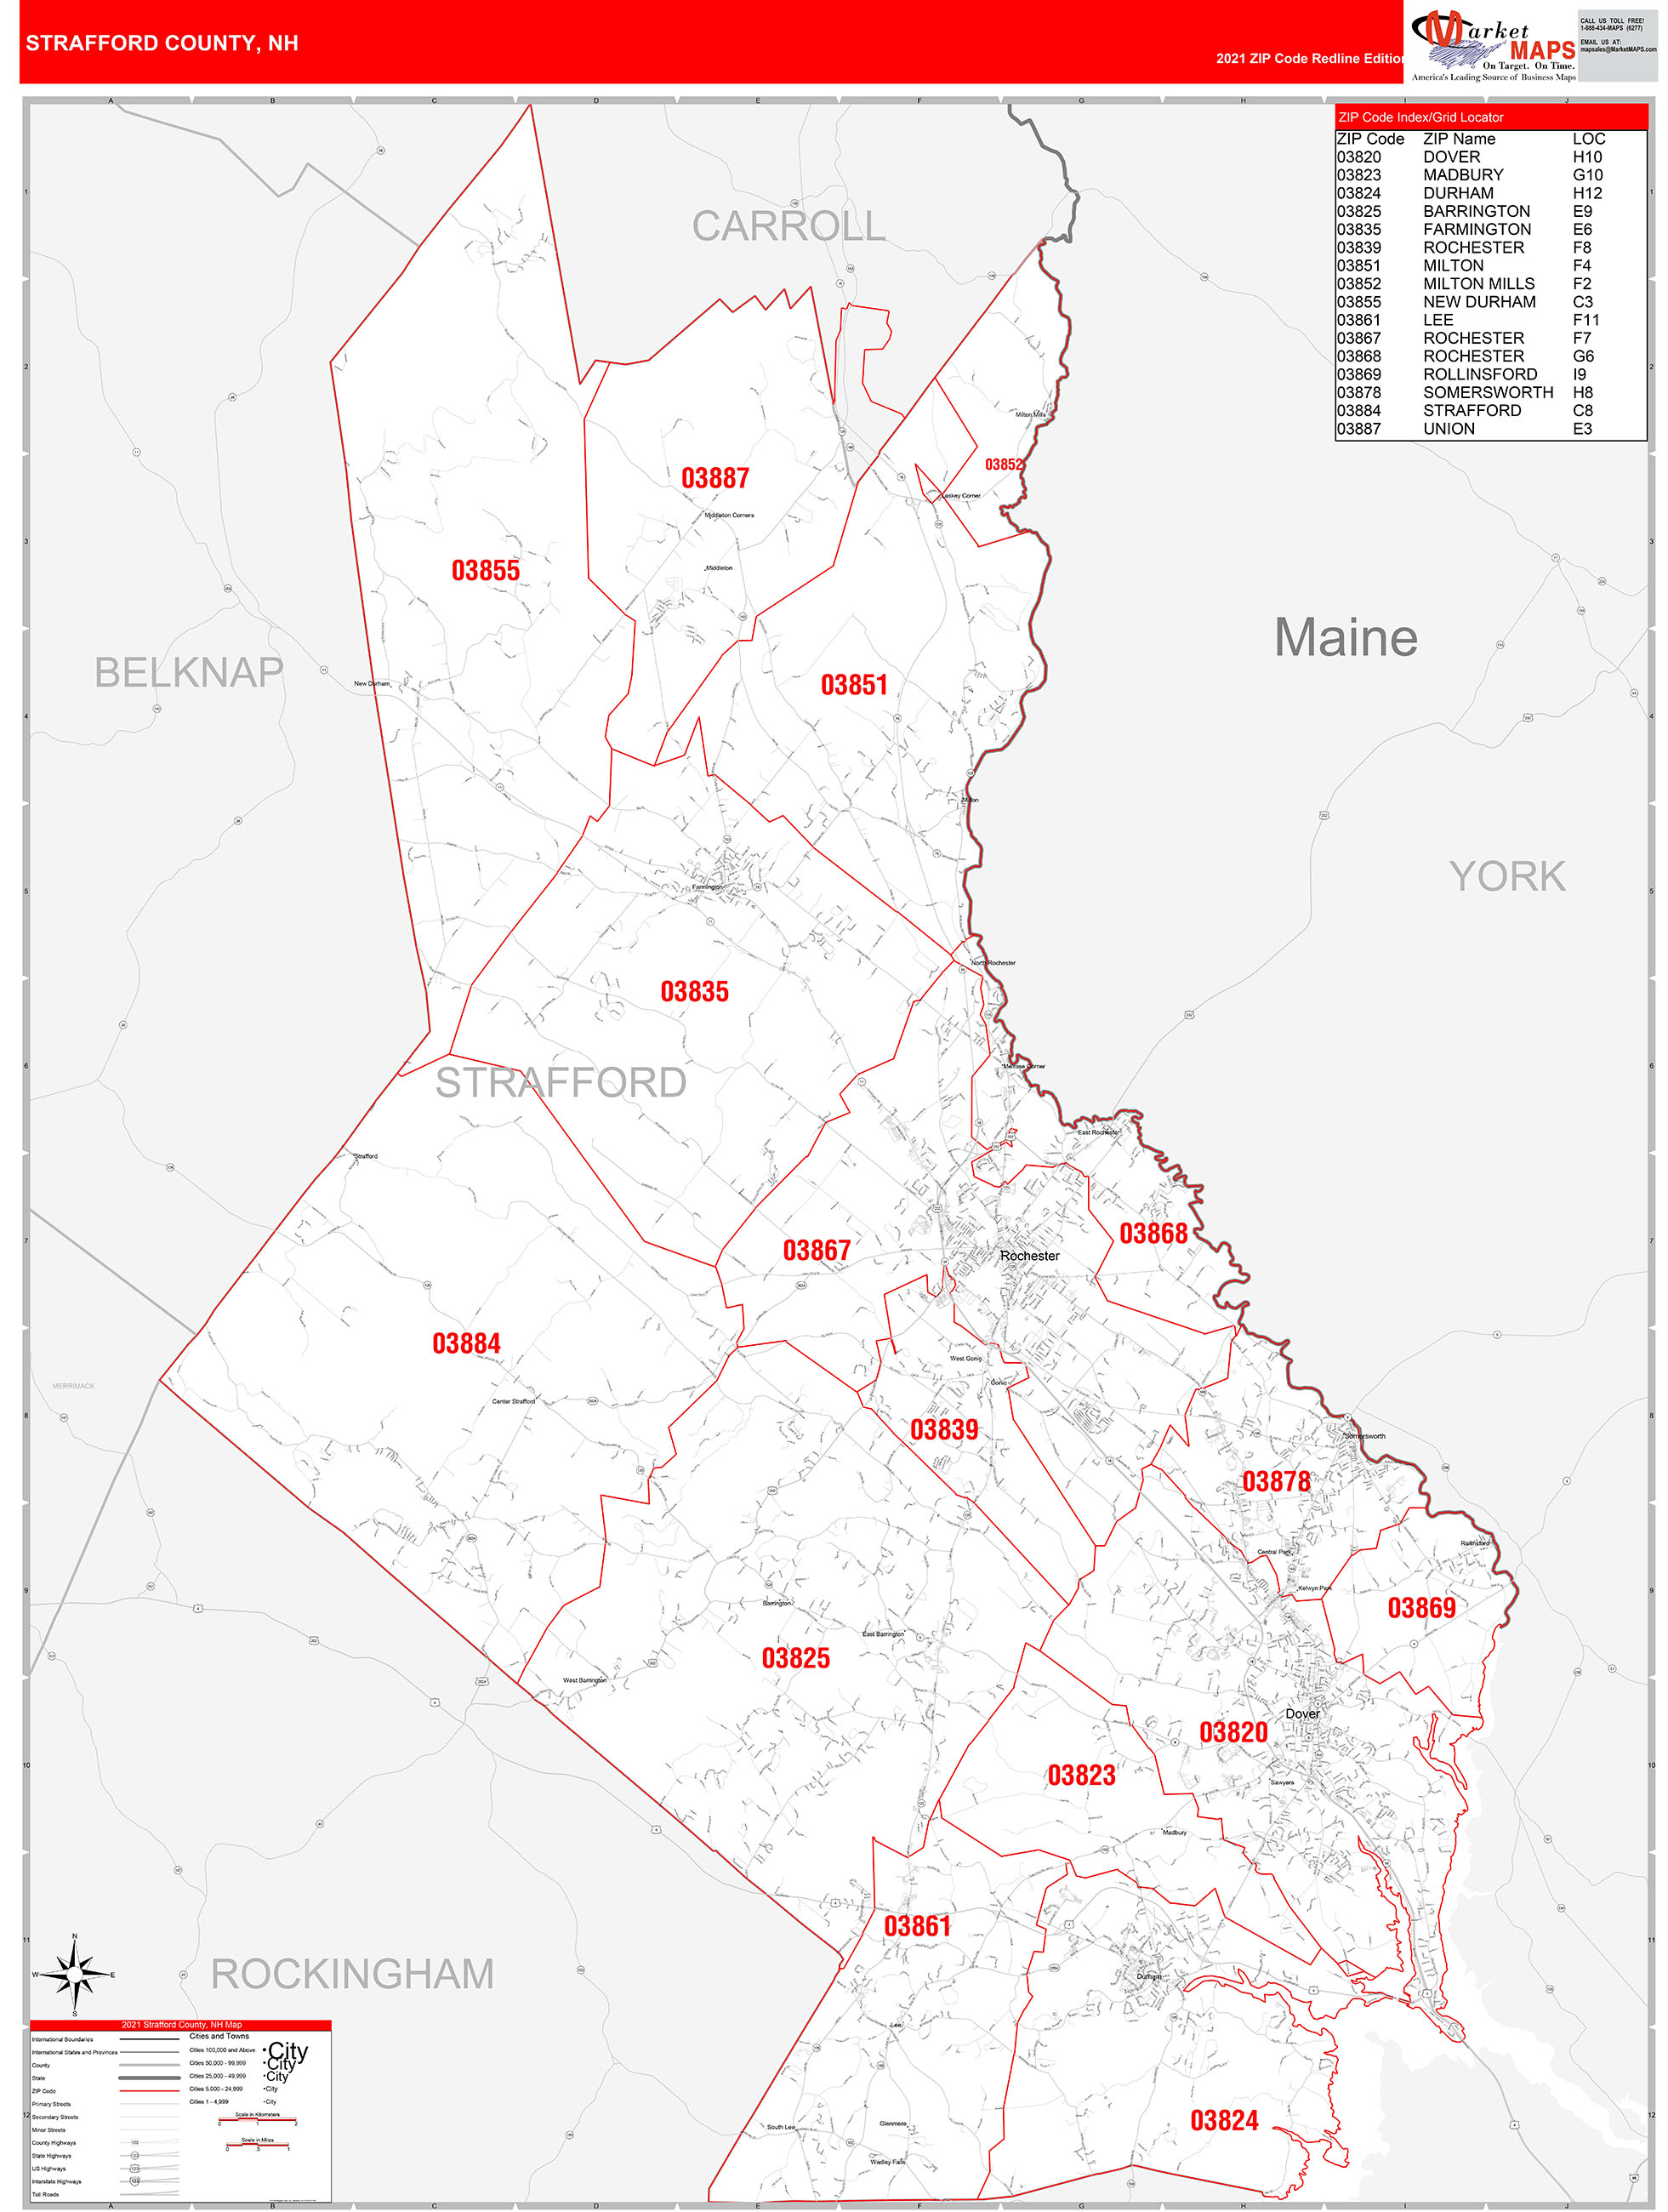 Strafford County, NH Zip Code Wall Map Red Line Style by MarketMAPS